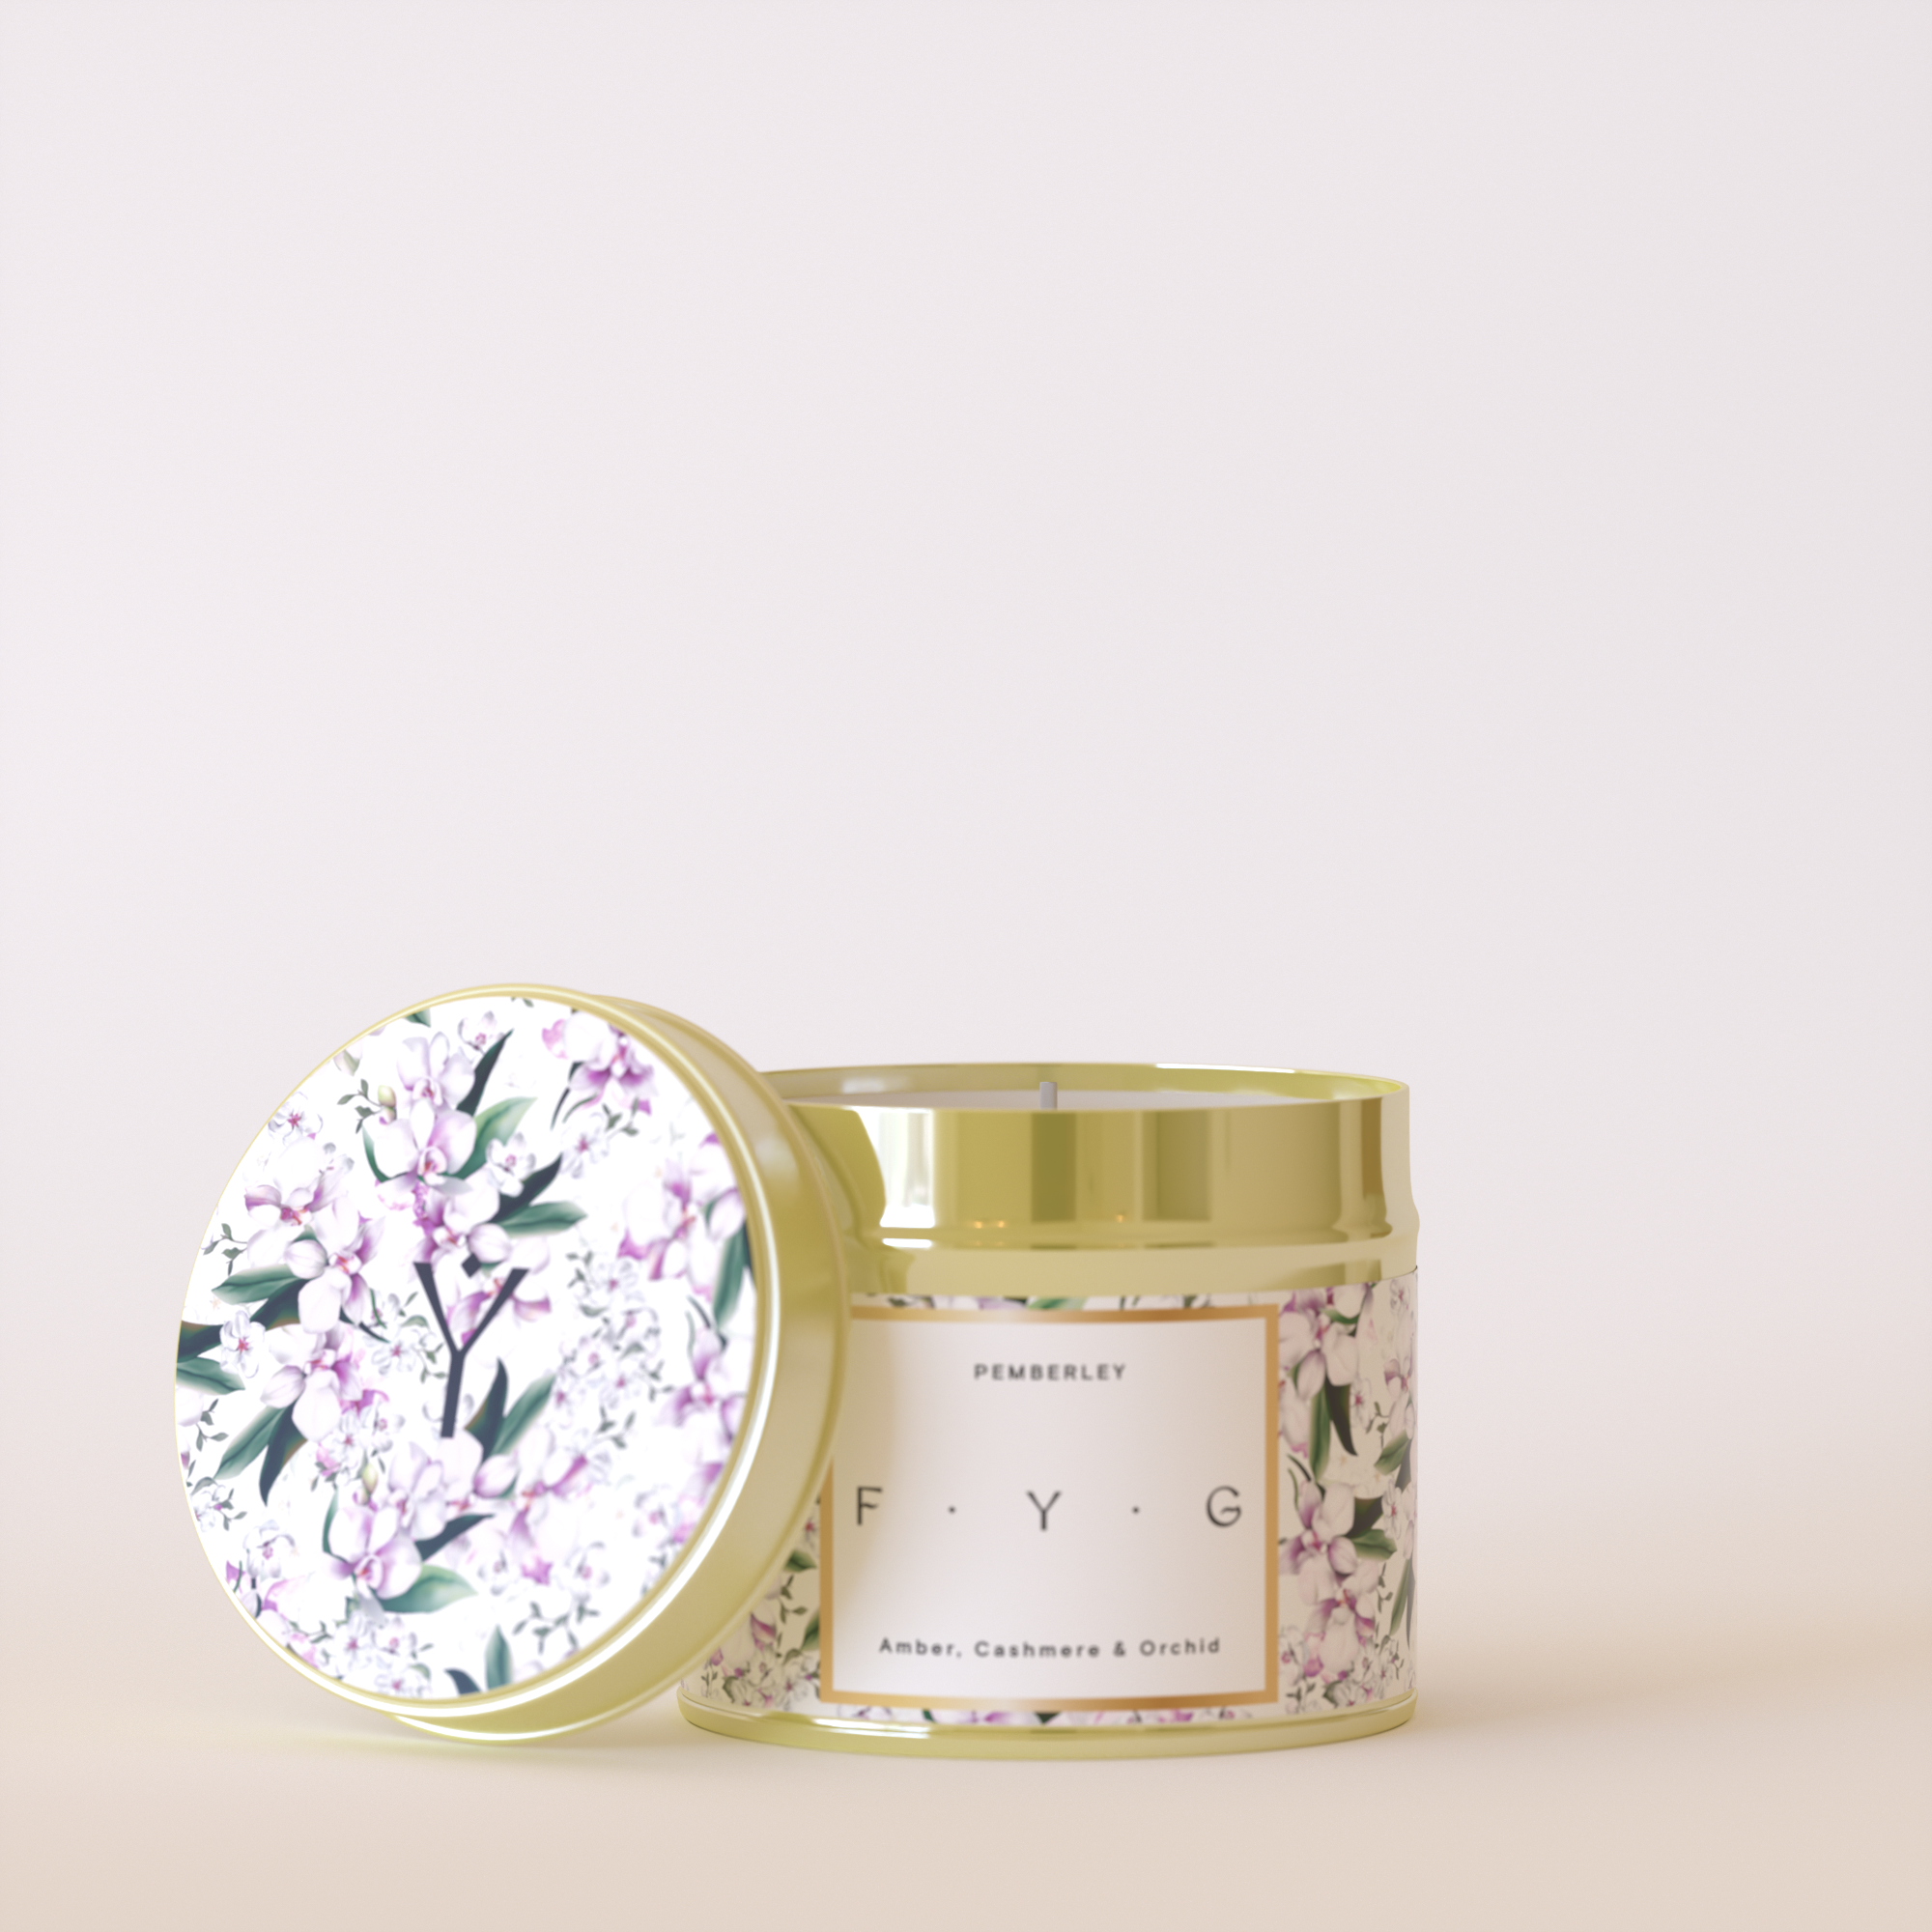 Find Your Glow Pemberley Tin Candle